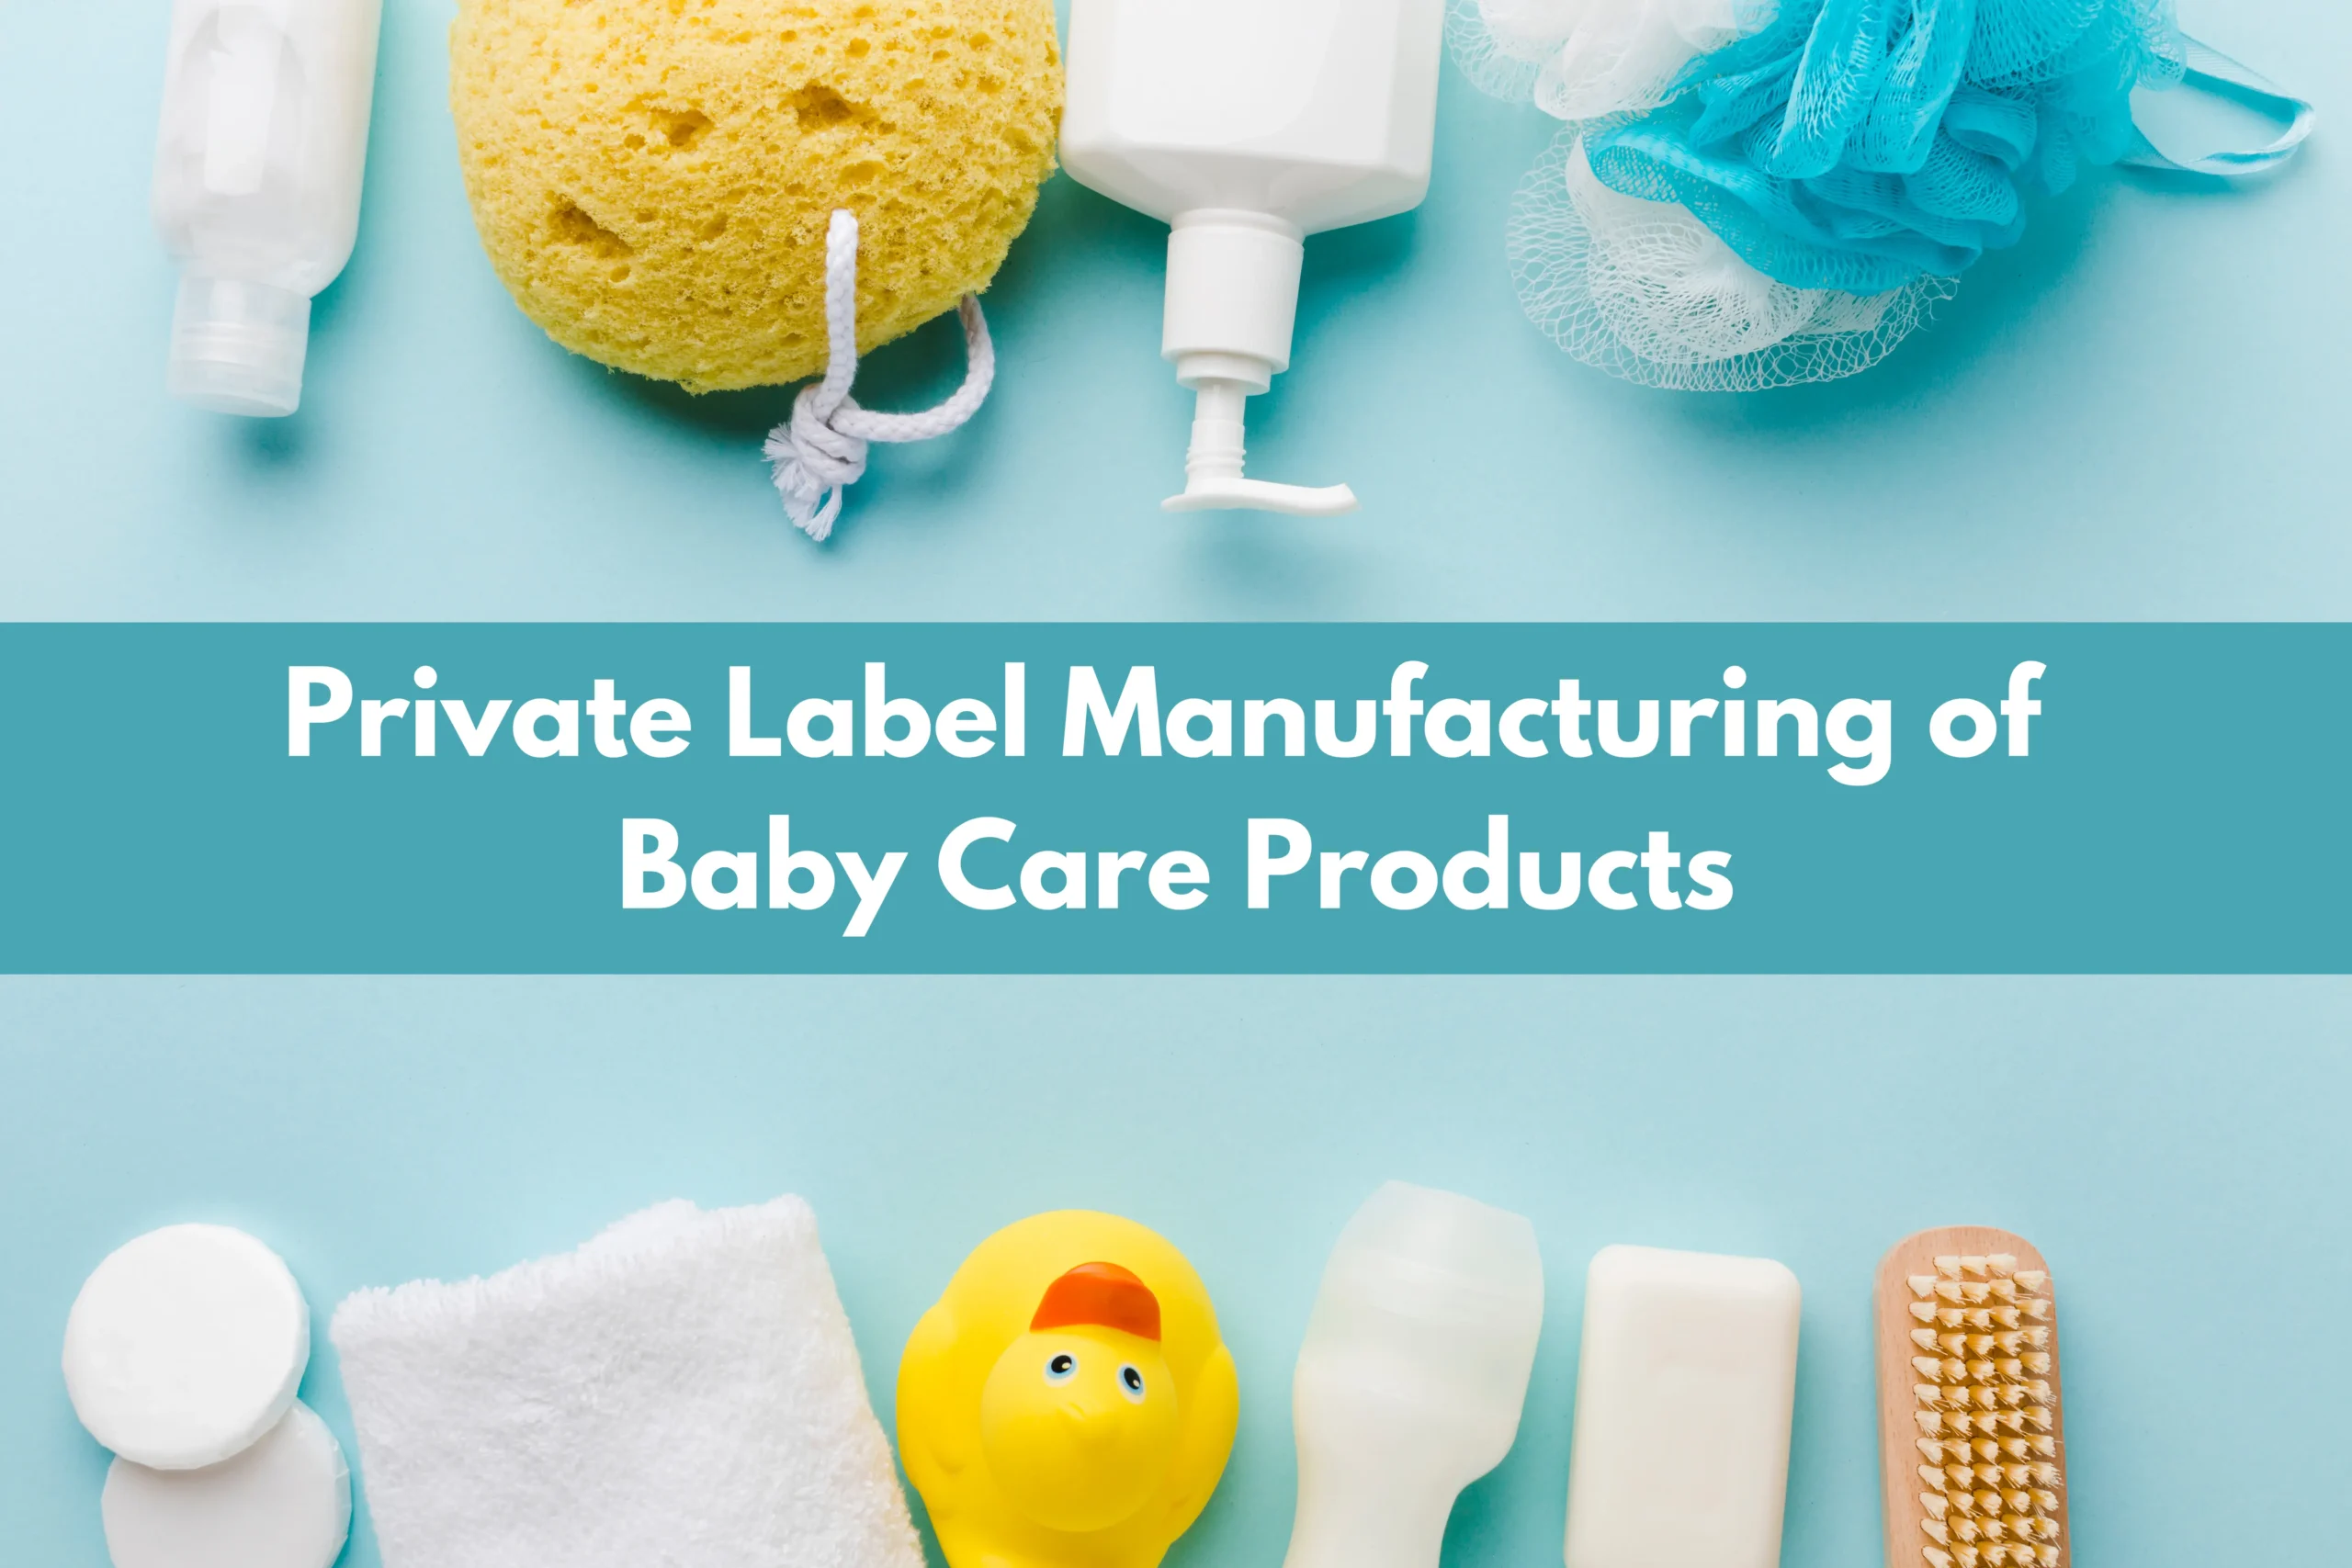 Blog 10 - Private Label Manufacturing of Baby Care Products